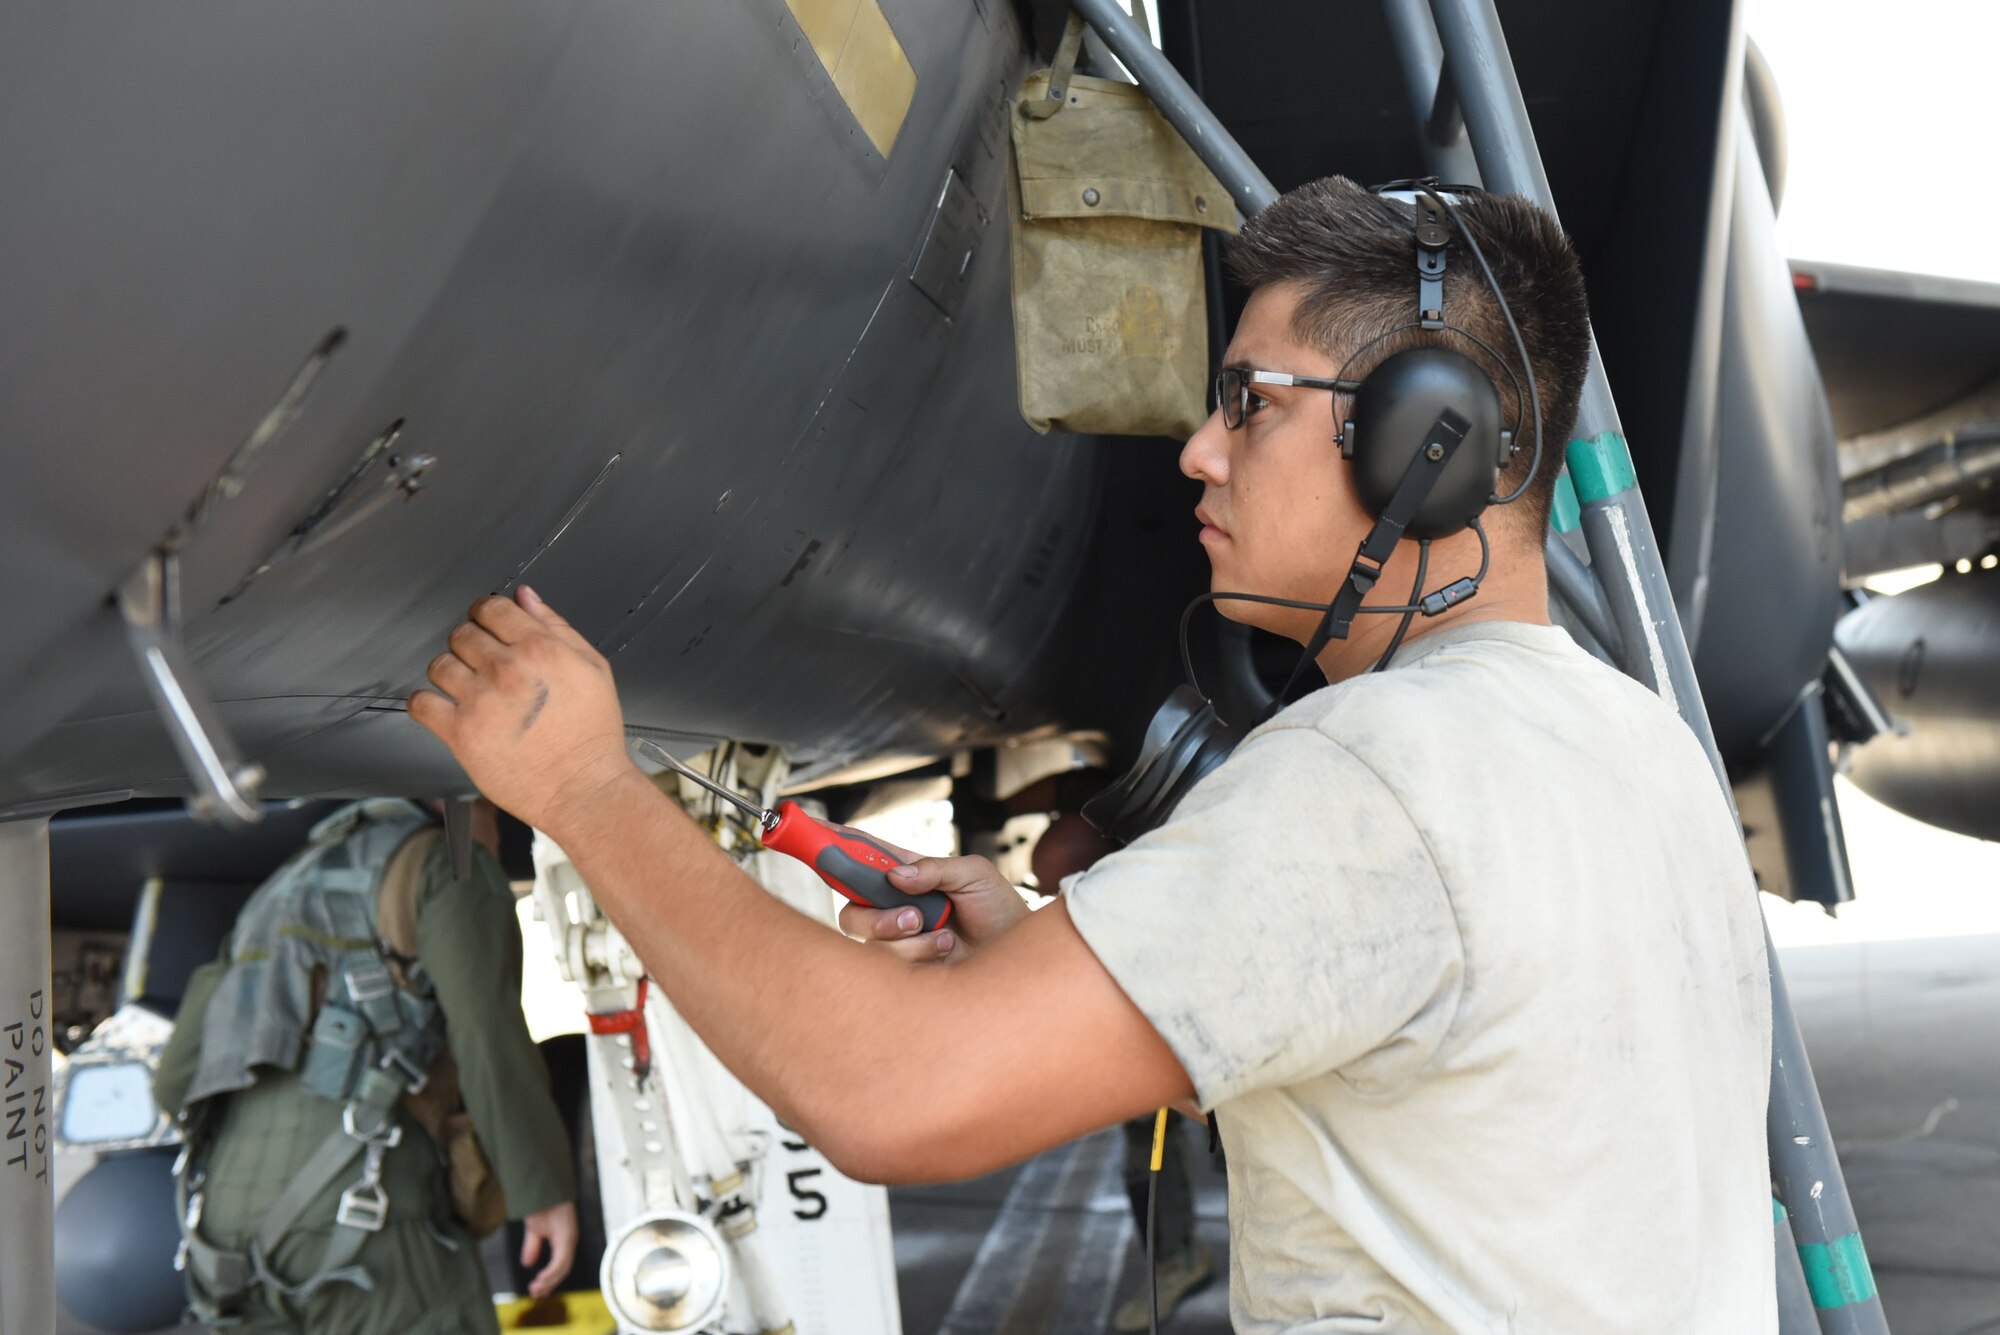 Airman 1st Class Joshua Castaneda, 4th Aircraft Maintenance Squadron crew chief, conducts a preflight inspection during exercise Thunderdome 17-02, July 21, 2017, at Seymour Johnson Air Force Base, North Carolina. By working together during the exercise, members of the 4th Fighter Wing continue to enhance deployment operations. (U.S. Air Force photo by Airman 1st Class Victoria Boyton)